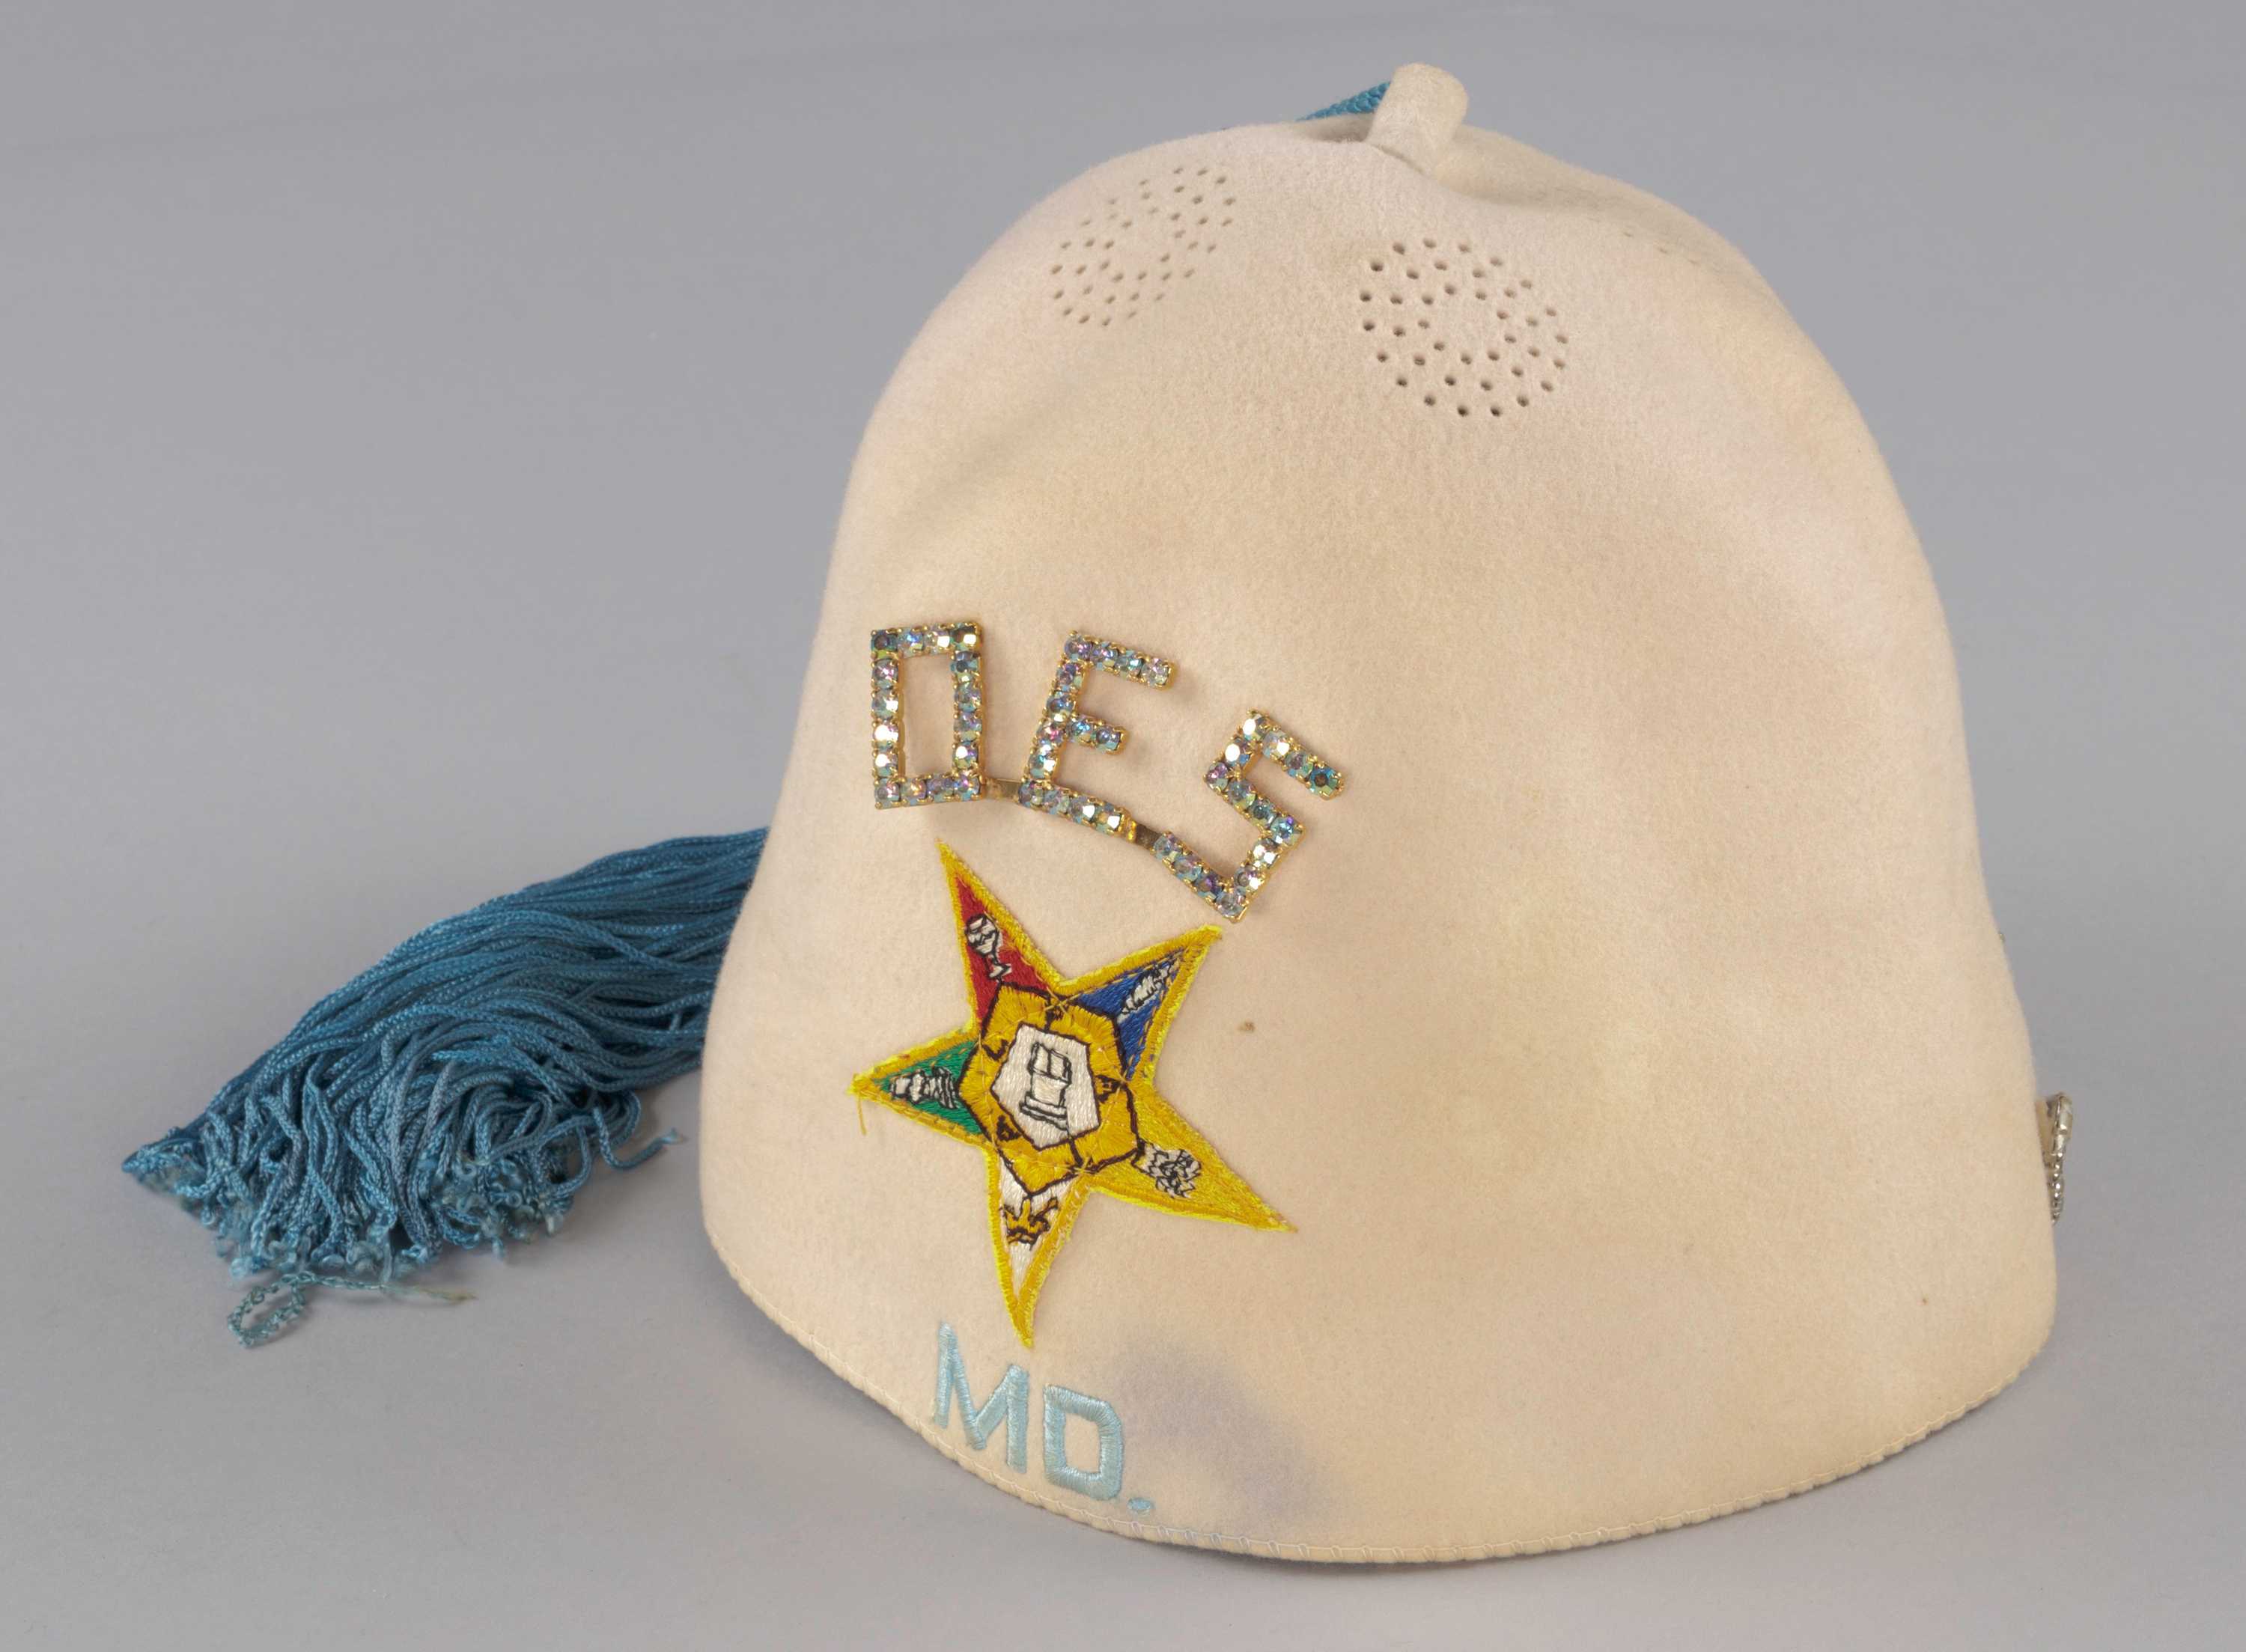 This cream felt fez hat was worn by a member of the Maryland Order of the Eastern Star.